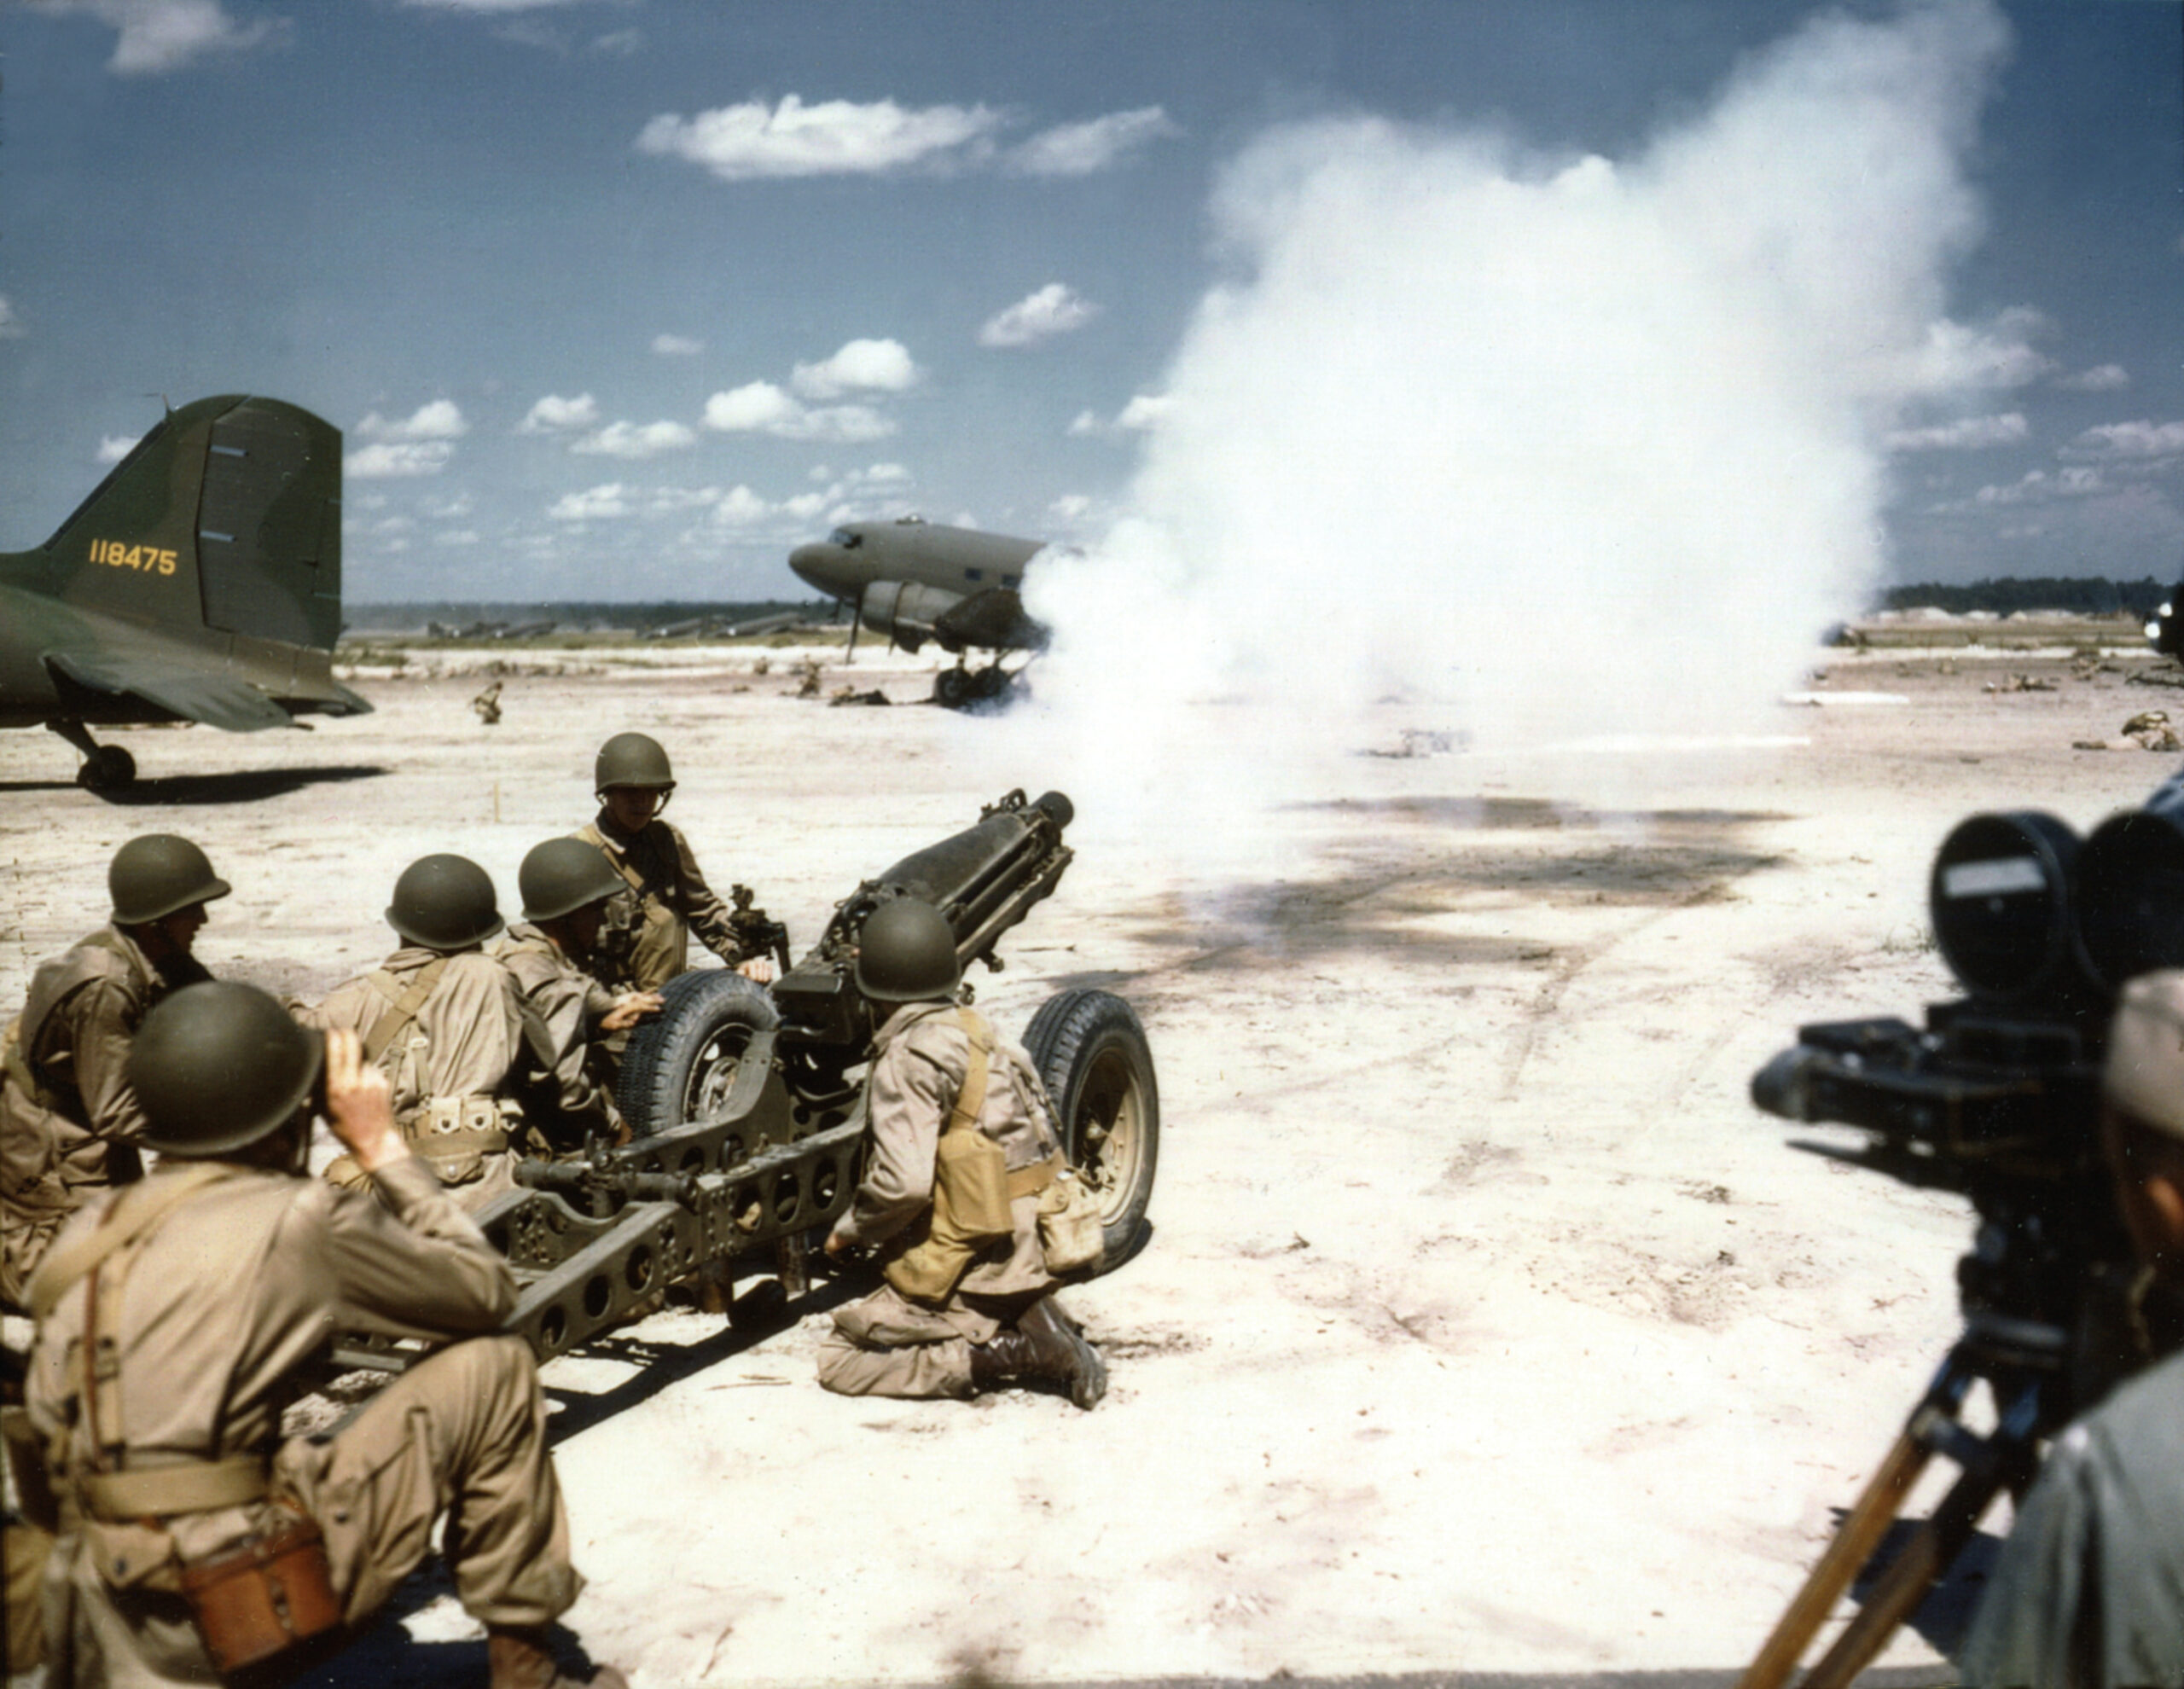 Boom! Airborne artillerymen fire off a round from their 105mm howitzer during a battle simulation.